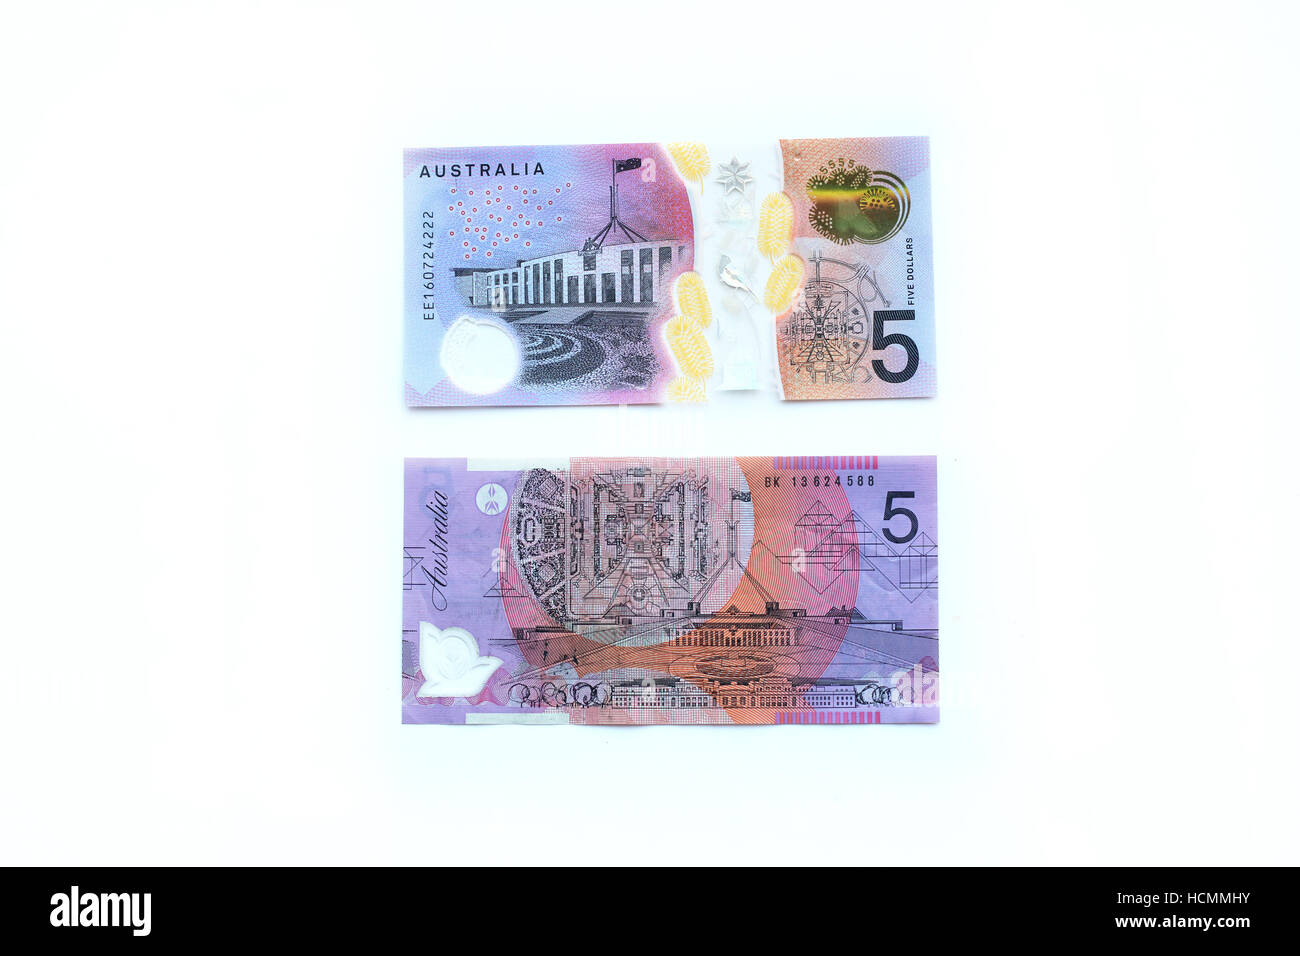 $5 Australian dollar new and old bank note Stock Photo